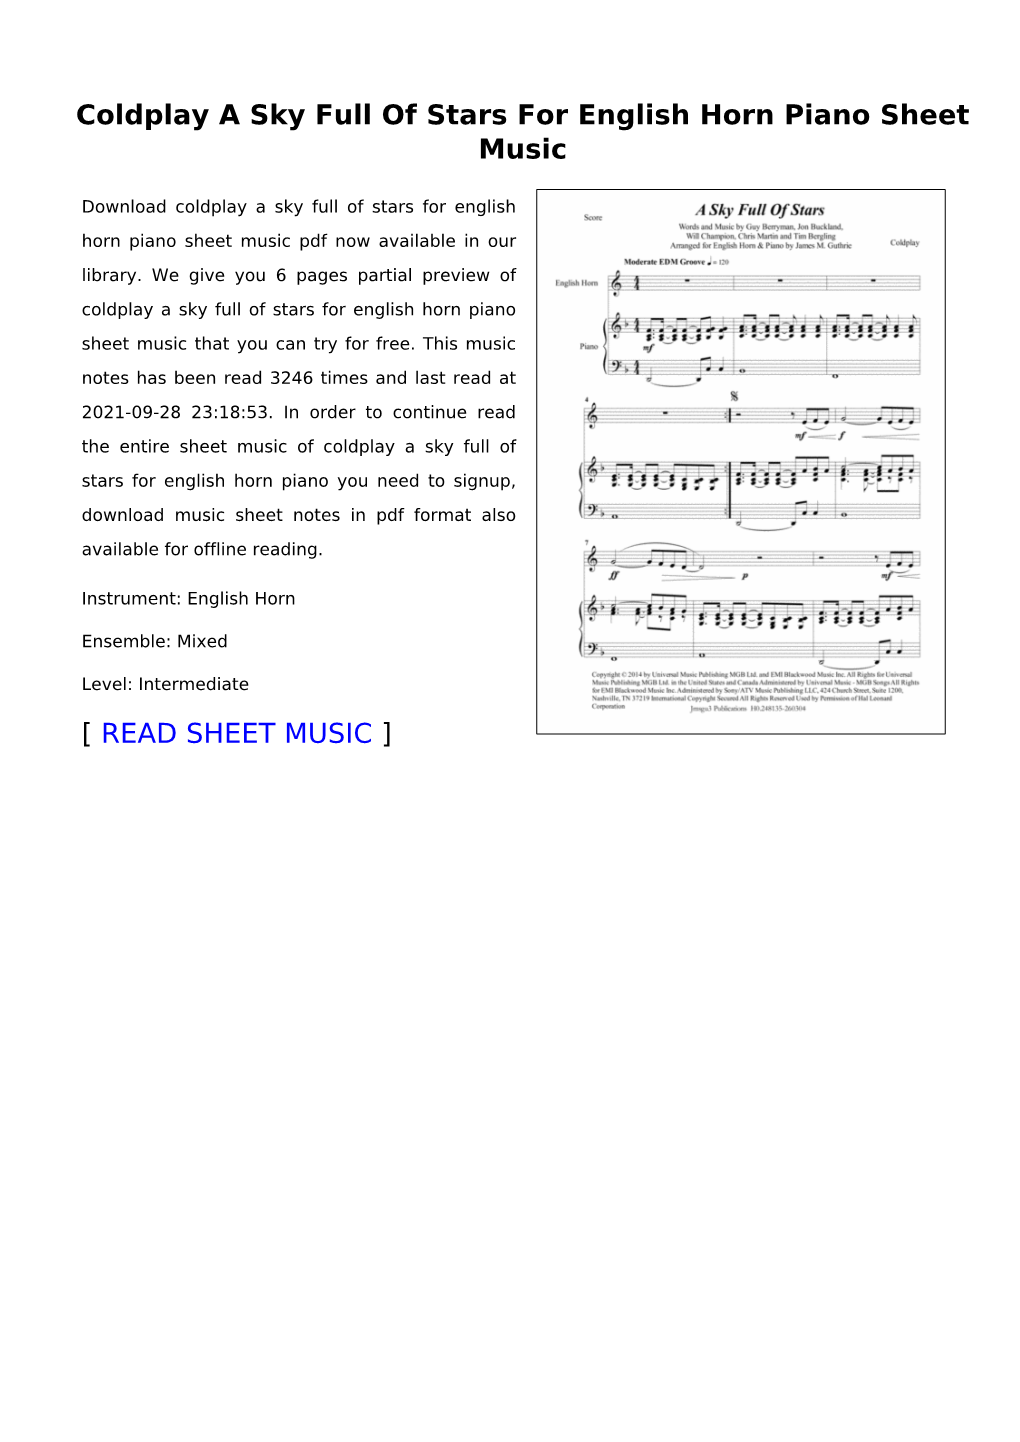 Coldplay a Sky Full of Stars for English Horn Piano Sheet Music